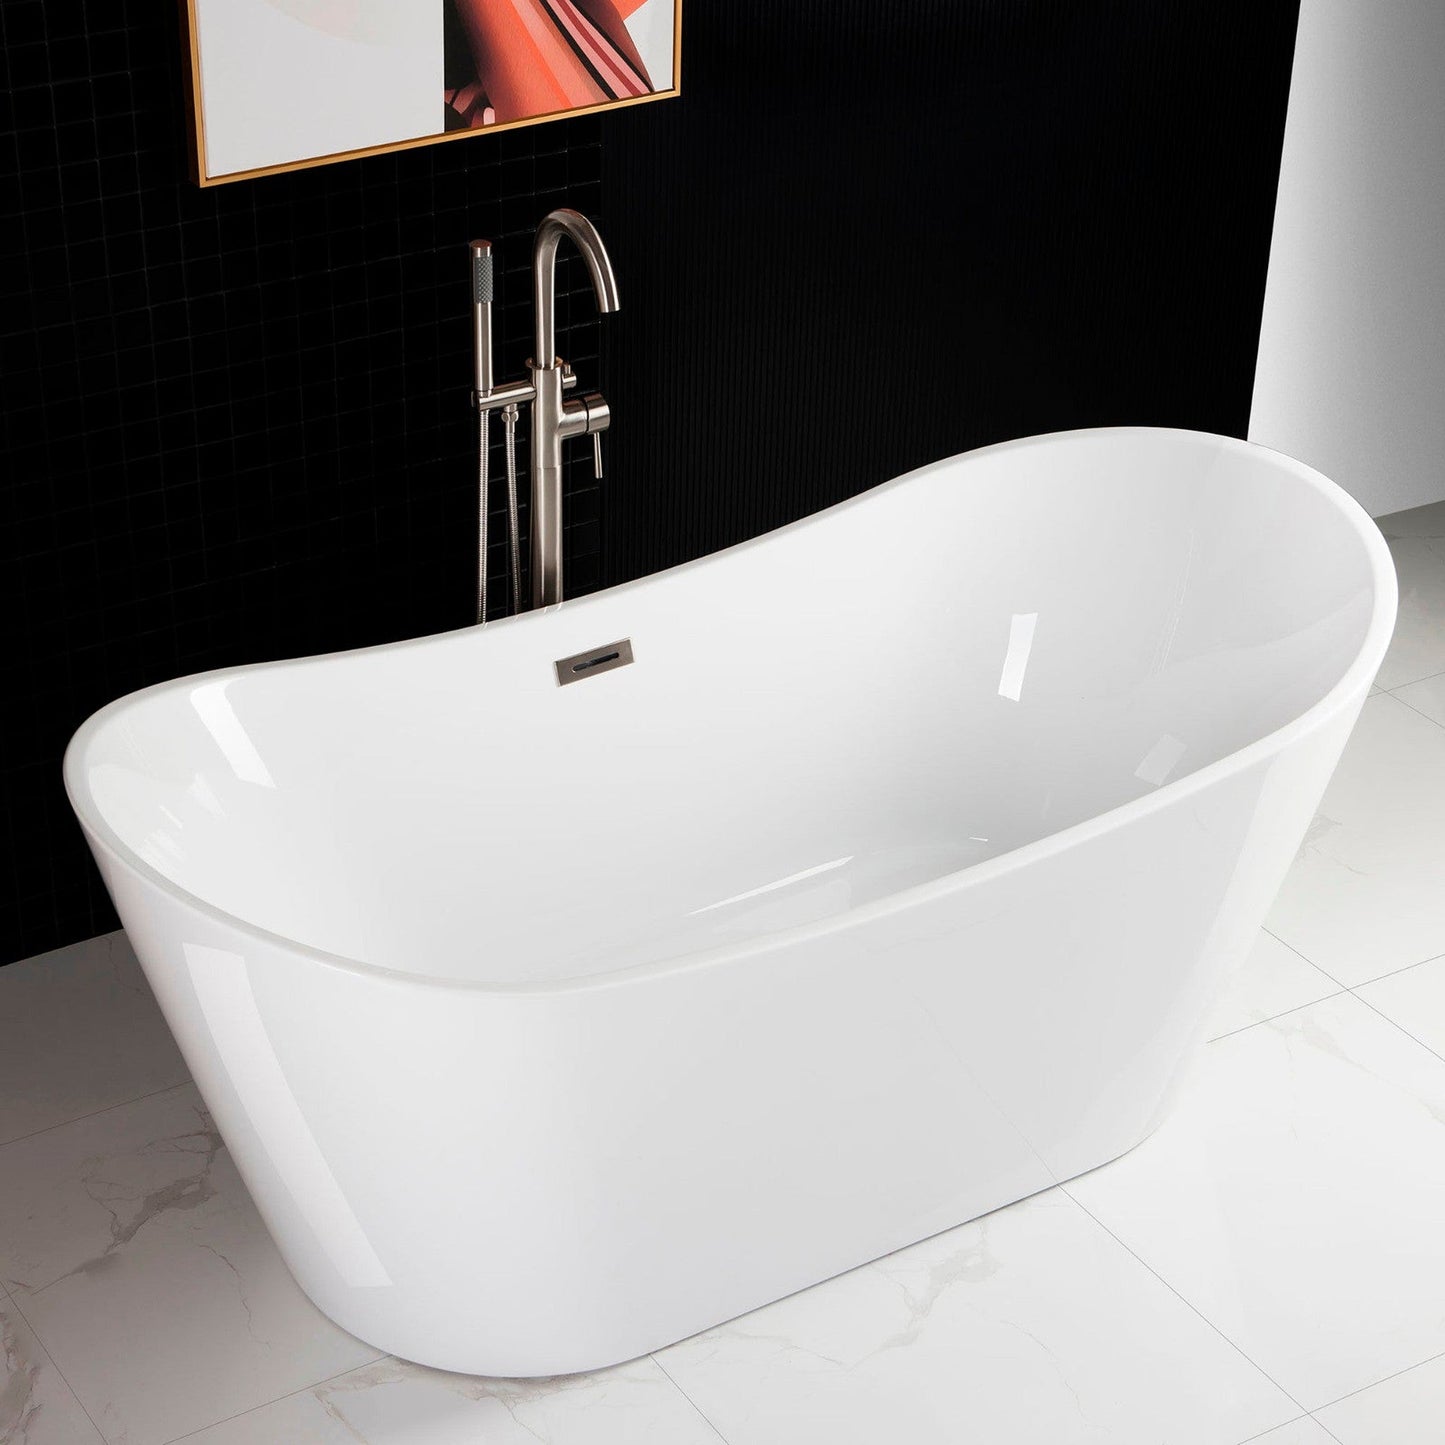 WoodBridge B0010 67" White Acrylic Freestanding Contemporary Soaking Bathtub With Chrome Drain, Overflow, F0036CH Tub Filler and Caddy Tray